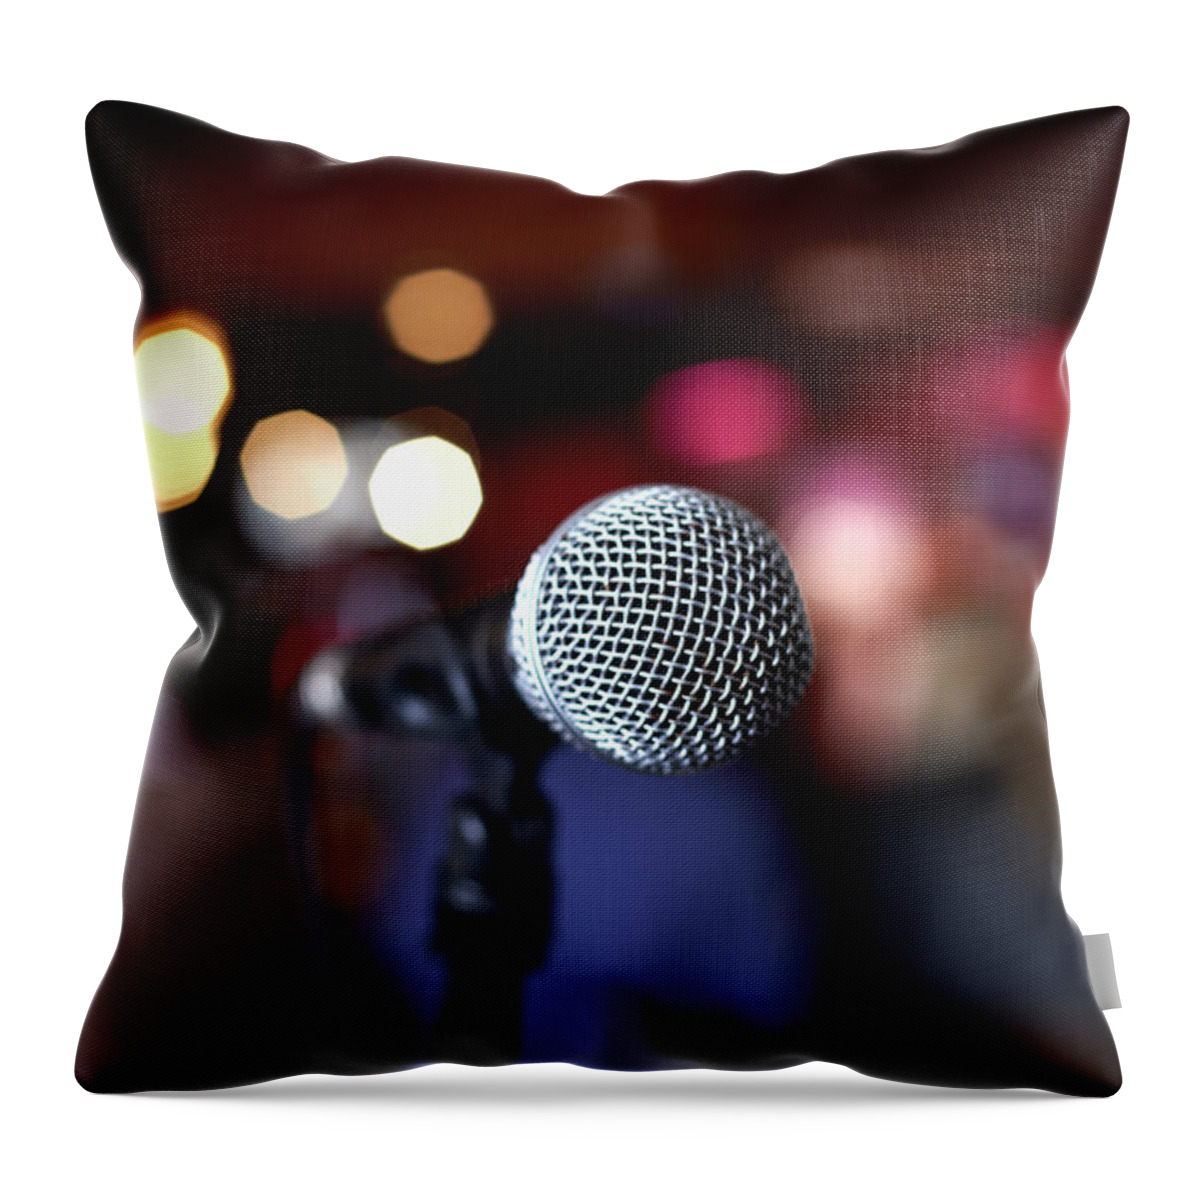 Performance Throw Pillow featuring the photograph Close Up Of Microphone On Stage In by Gary John Norman